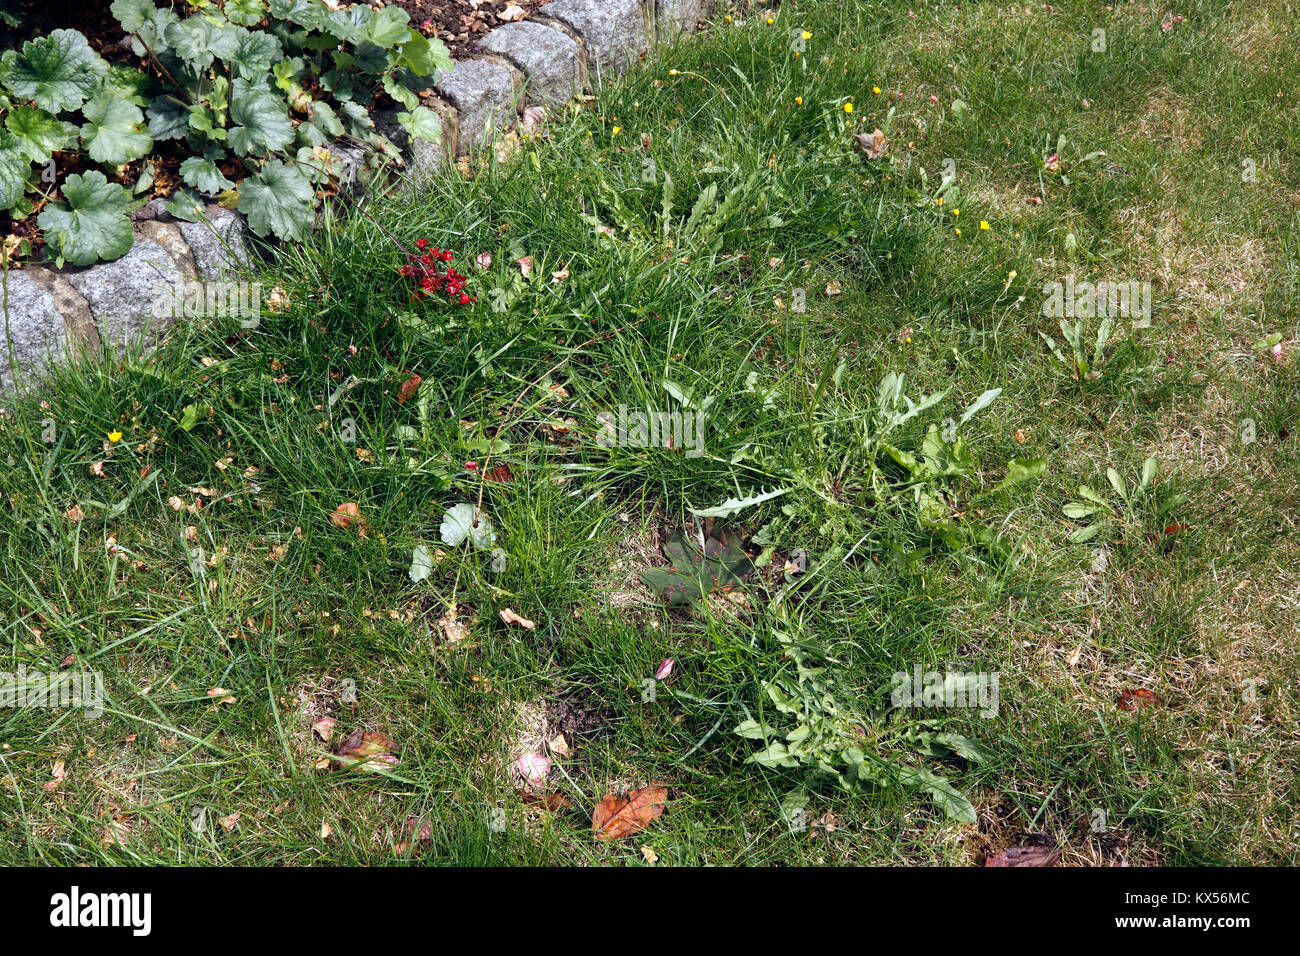 SUMMER LAWN WEEDS Stock Photo